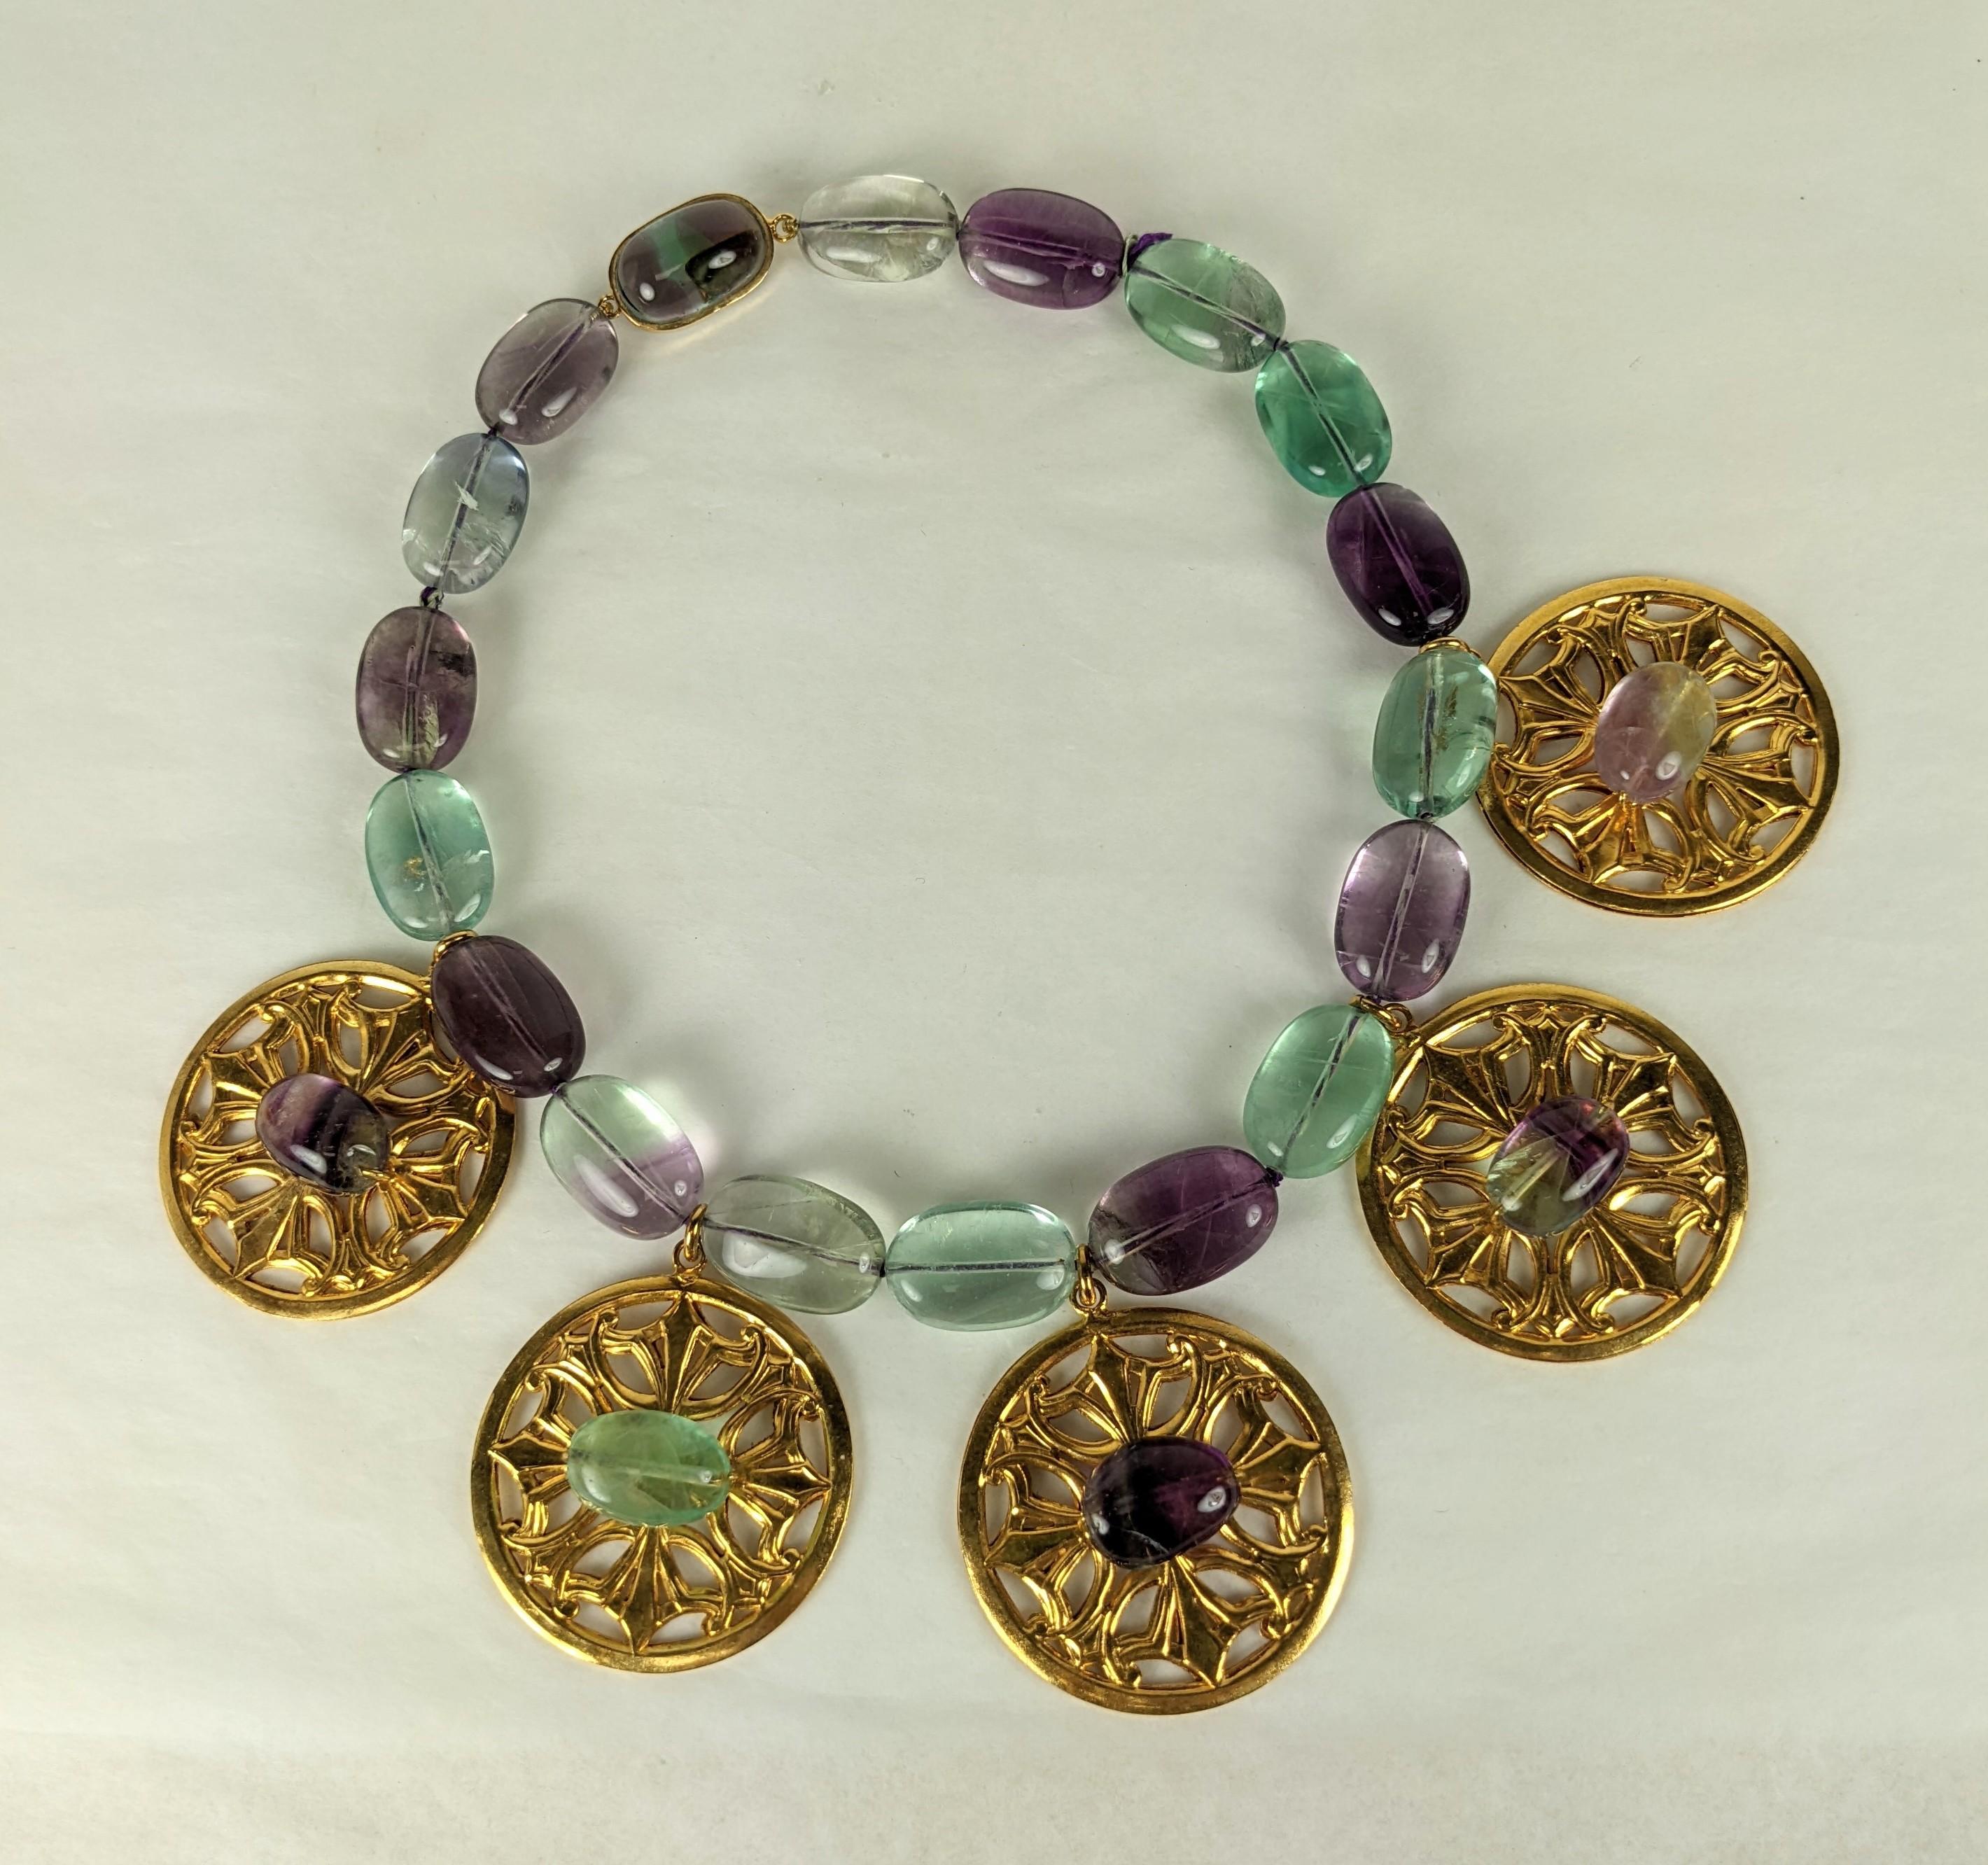 Amazing Yves Saint Laurent Fluorite and Gilt Bronze Necklace, Maison Goossens. Unusual gilt bronze discs are set with natural fluorite beads and hang from a strand of hand knotted fluorite beads. The clasp is highly unusual as the poured glass